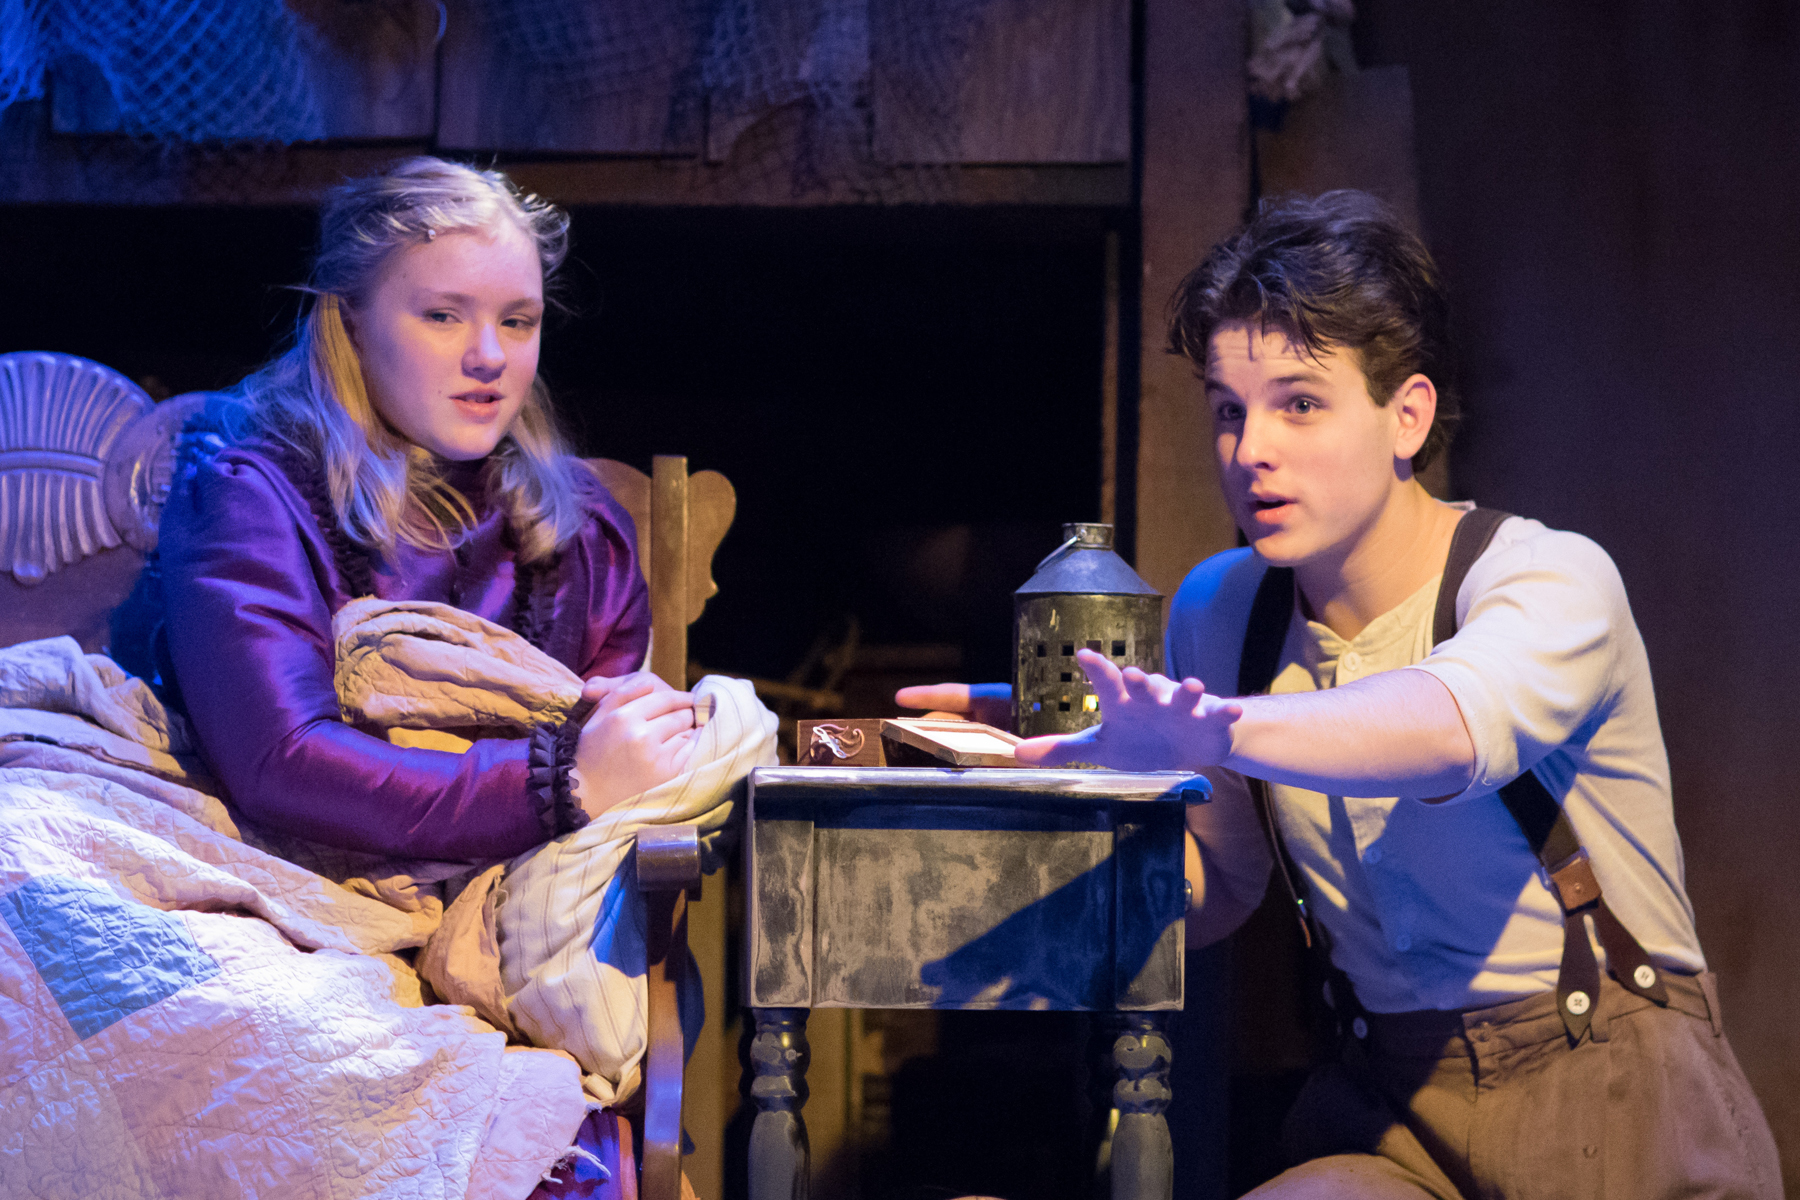 Aurelia Power (as Winnie Foster) and Fisher Stewart (as Jesse Tuck)
in Tuck Everlasting by Natalie Babbitt and adapted by Mark J. Frattaroli. Directed by
Jeff Church. Live on stage at The Coterie, February 27 - April 5, 2018. Photo by J.
Robert Schraeder and courtesy of The Coterie Theatre.